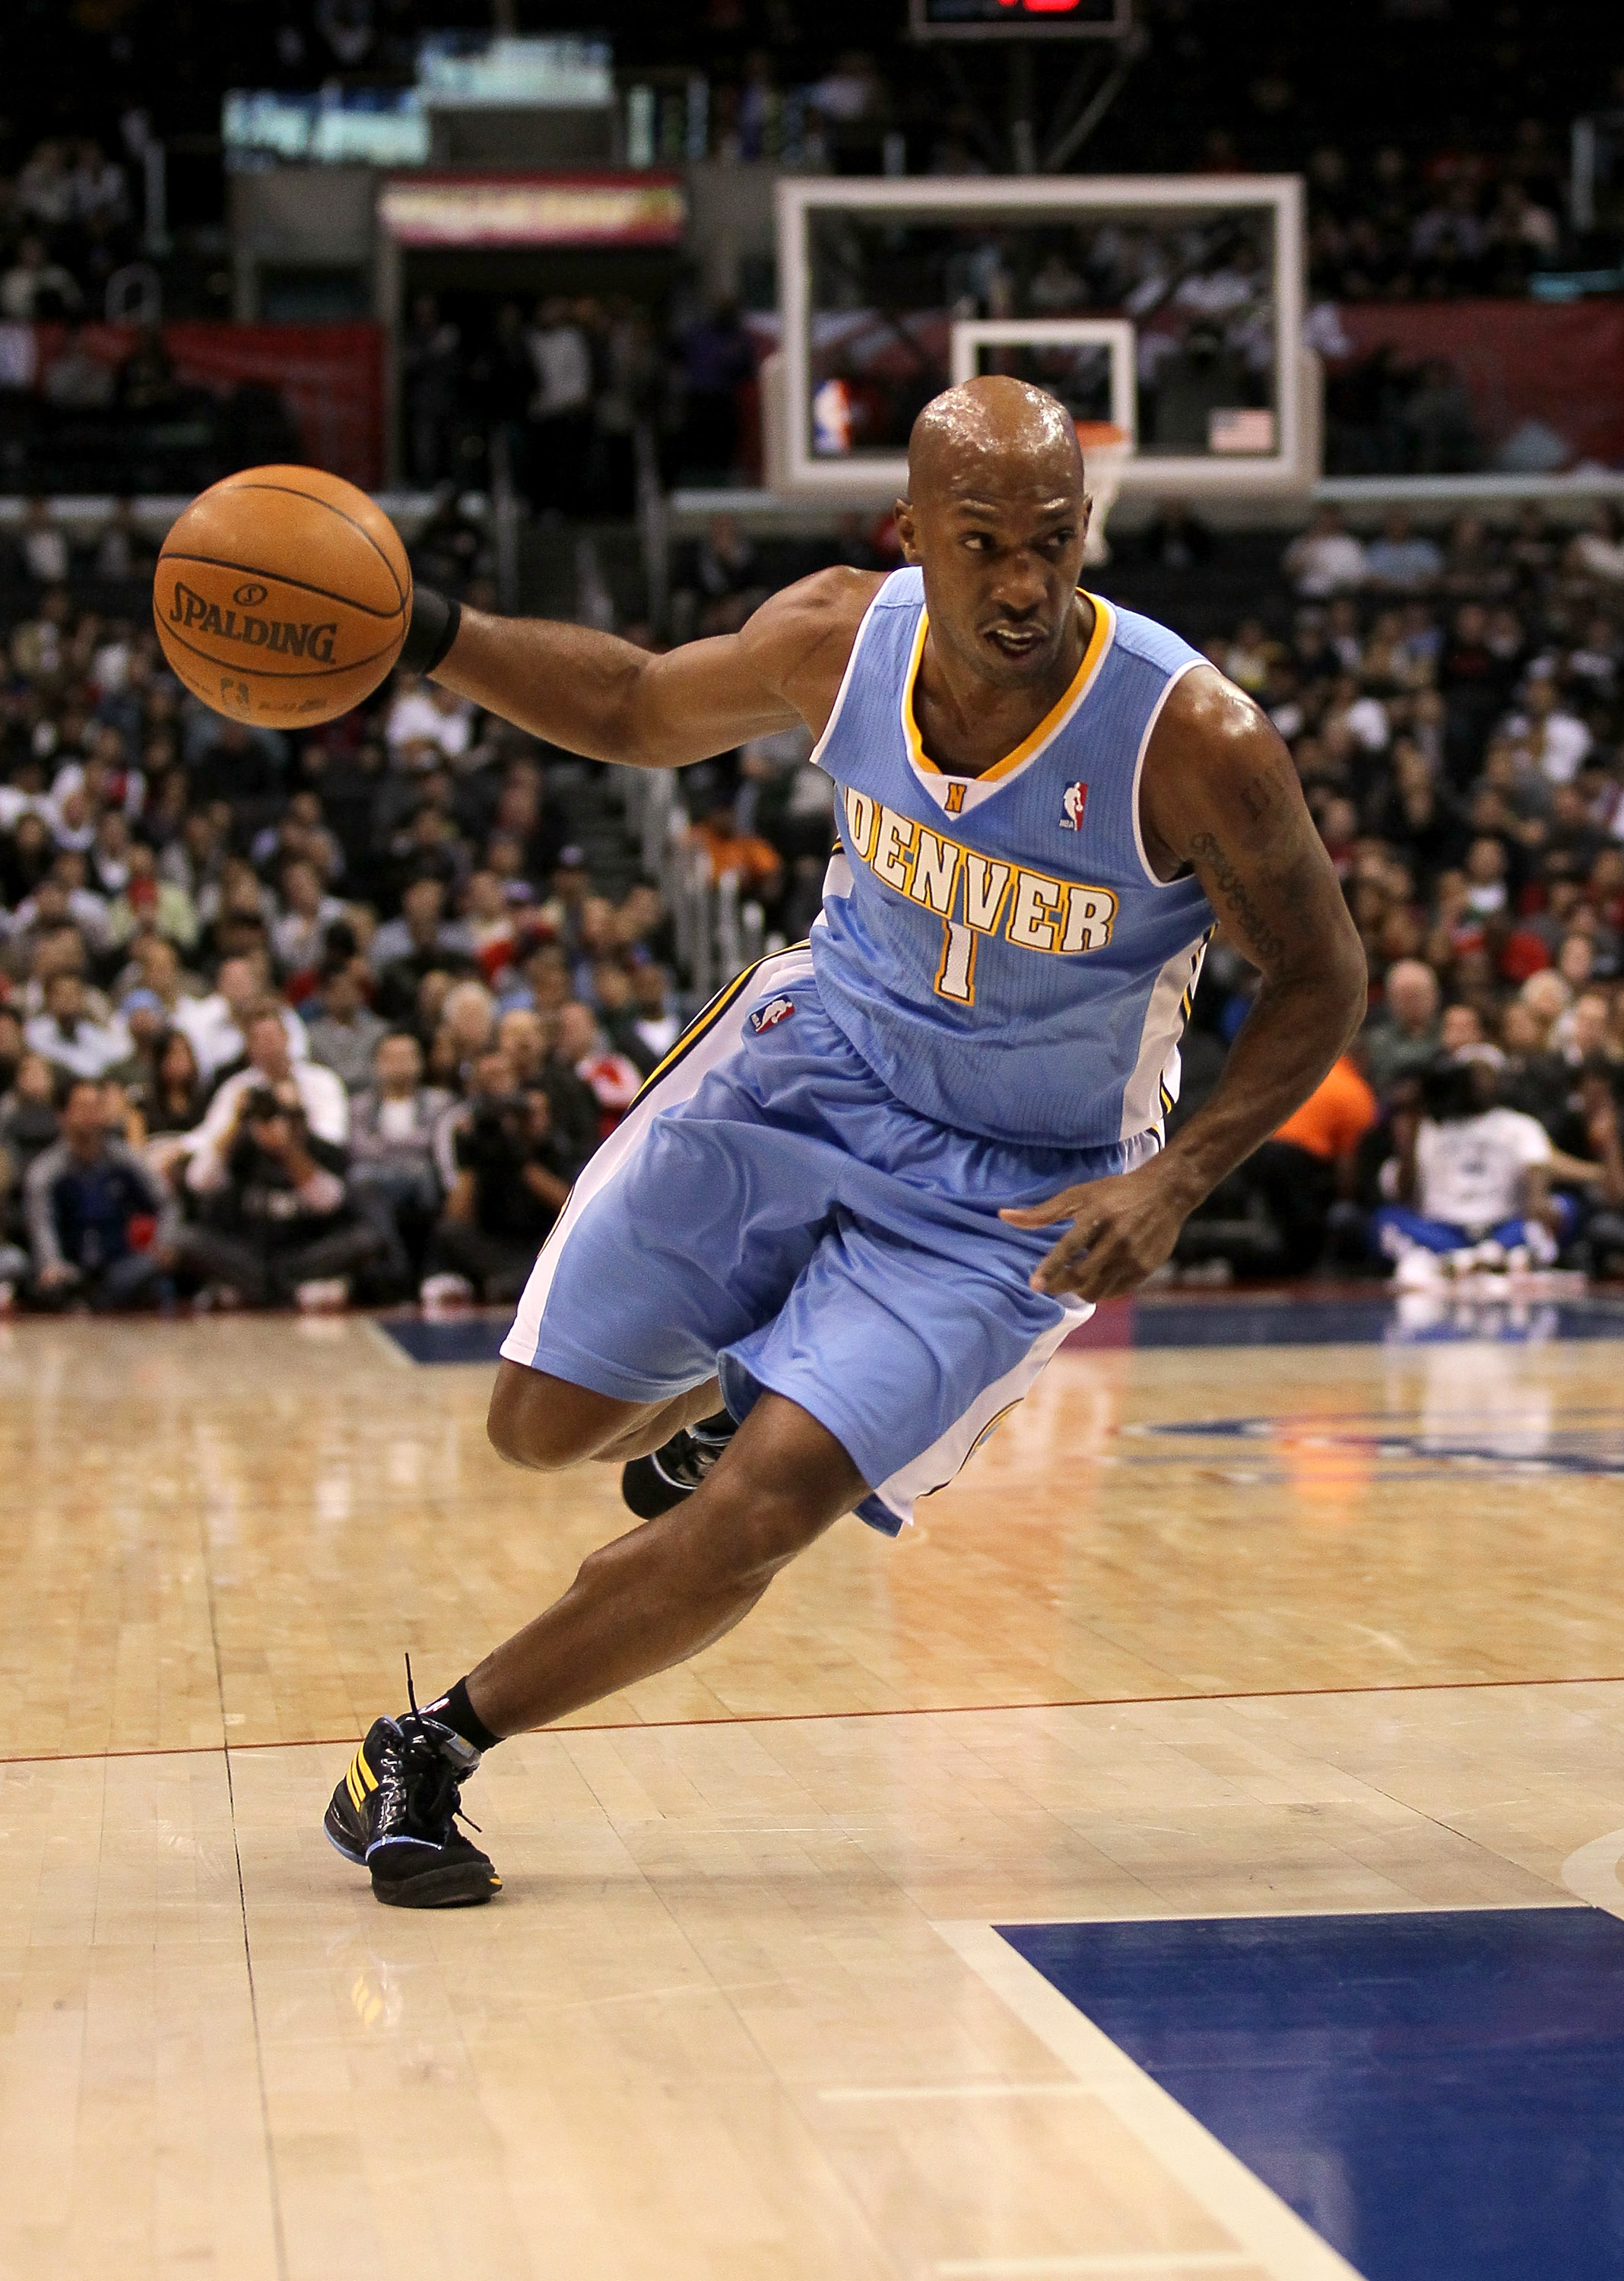 LOS ANGELES, CA - JANUARY 05: Chauncey Billups #1 of the Denver Nuggets drives against the Los Angeles Clippers at Staples Center on January 5, 2011  in Los Angeles, California.  The Clippers won 106-93.  NOTE TO USER: User expressly acknowledges and agre